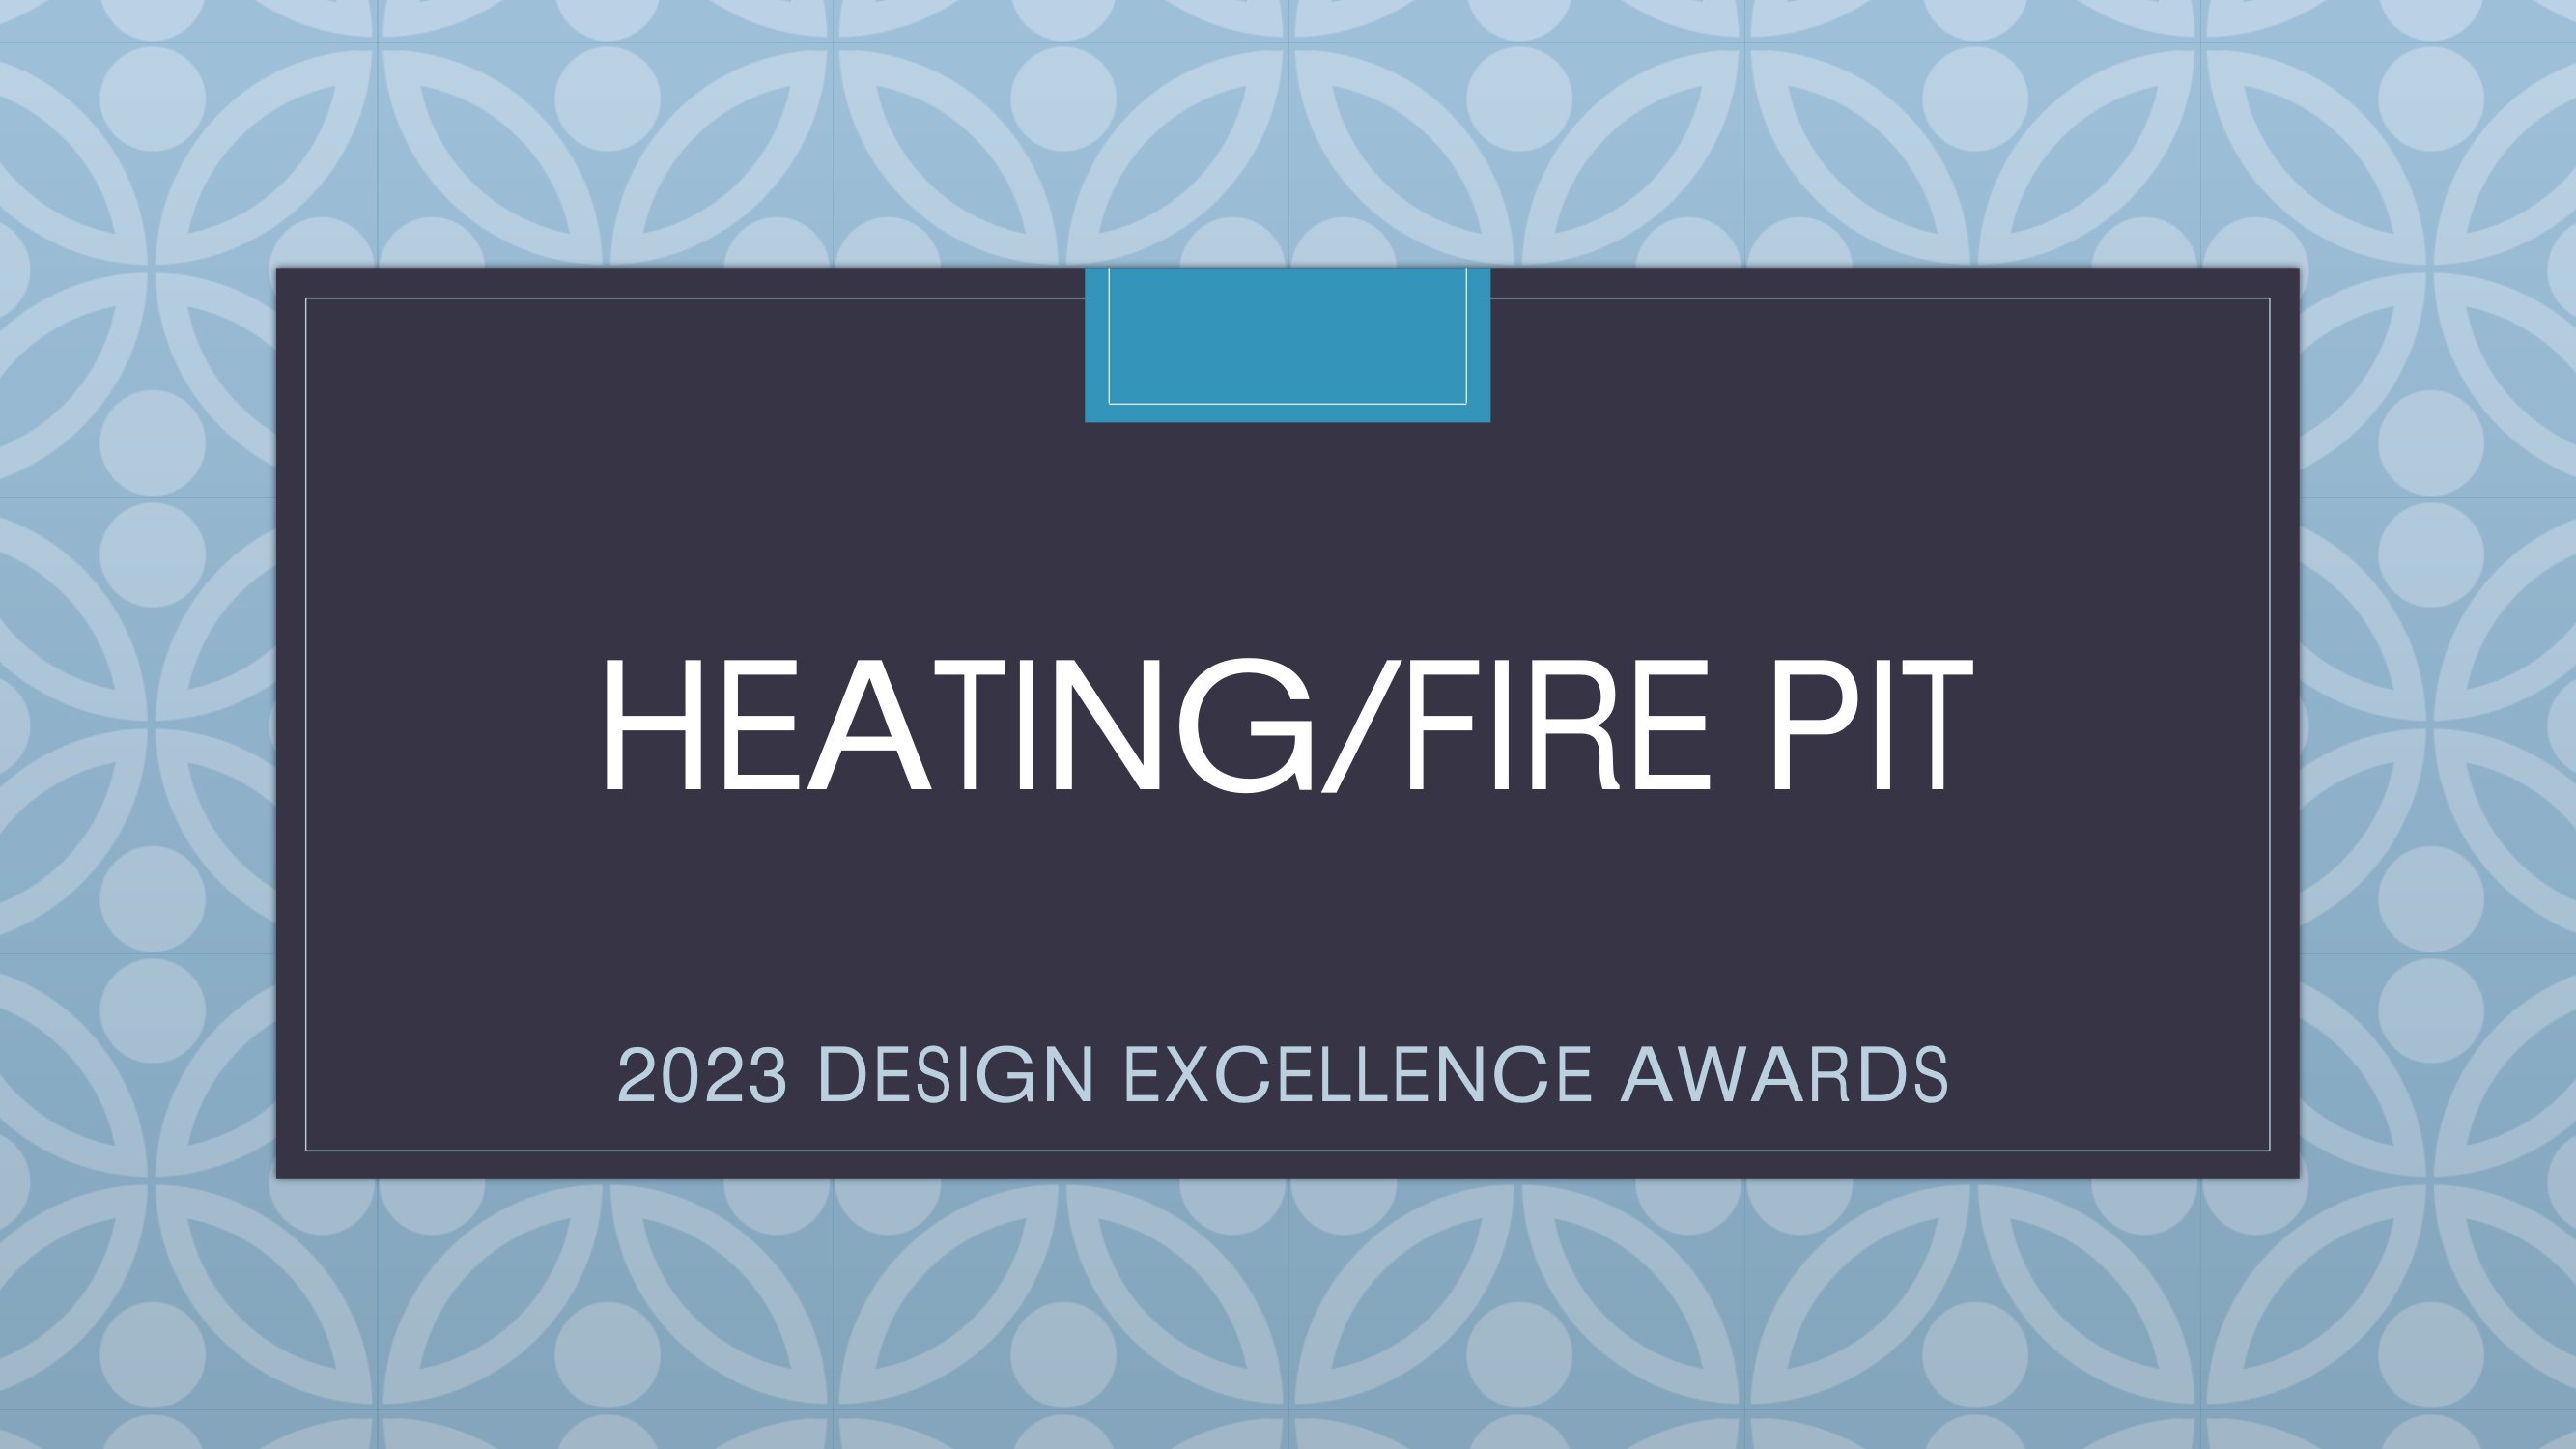 ICFA Design Excellence Awards - Heating / Fire Pit Category